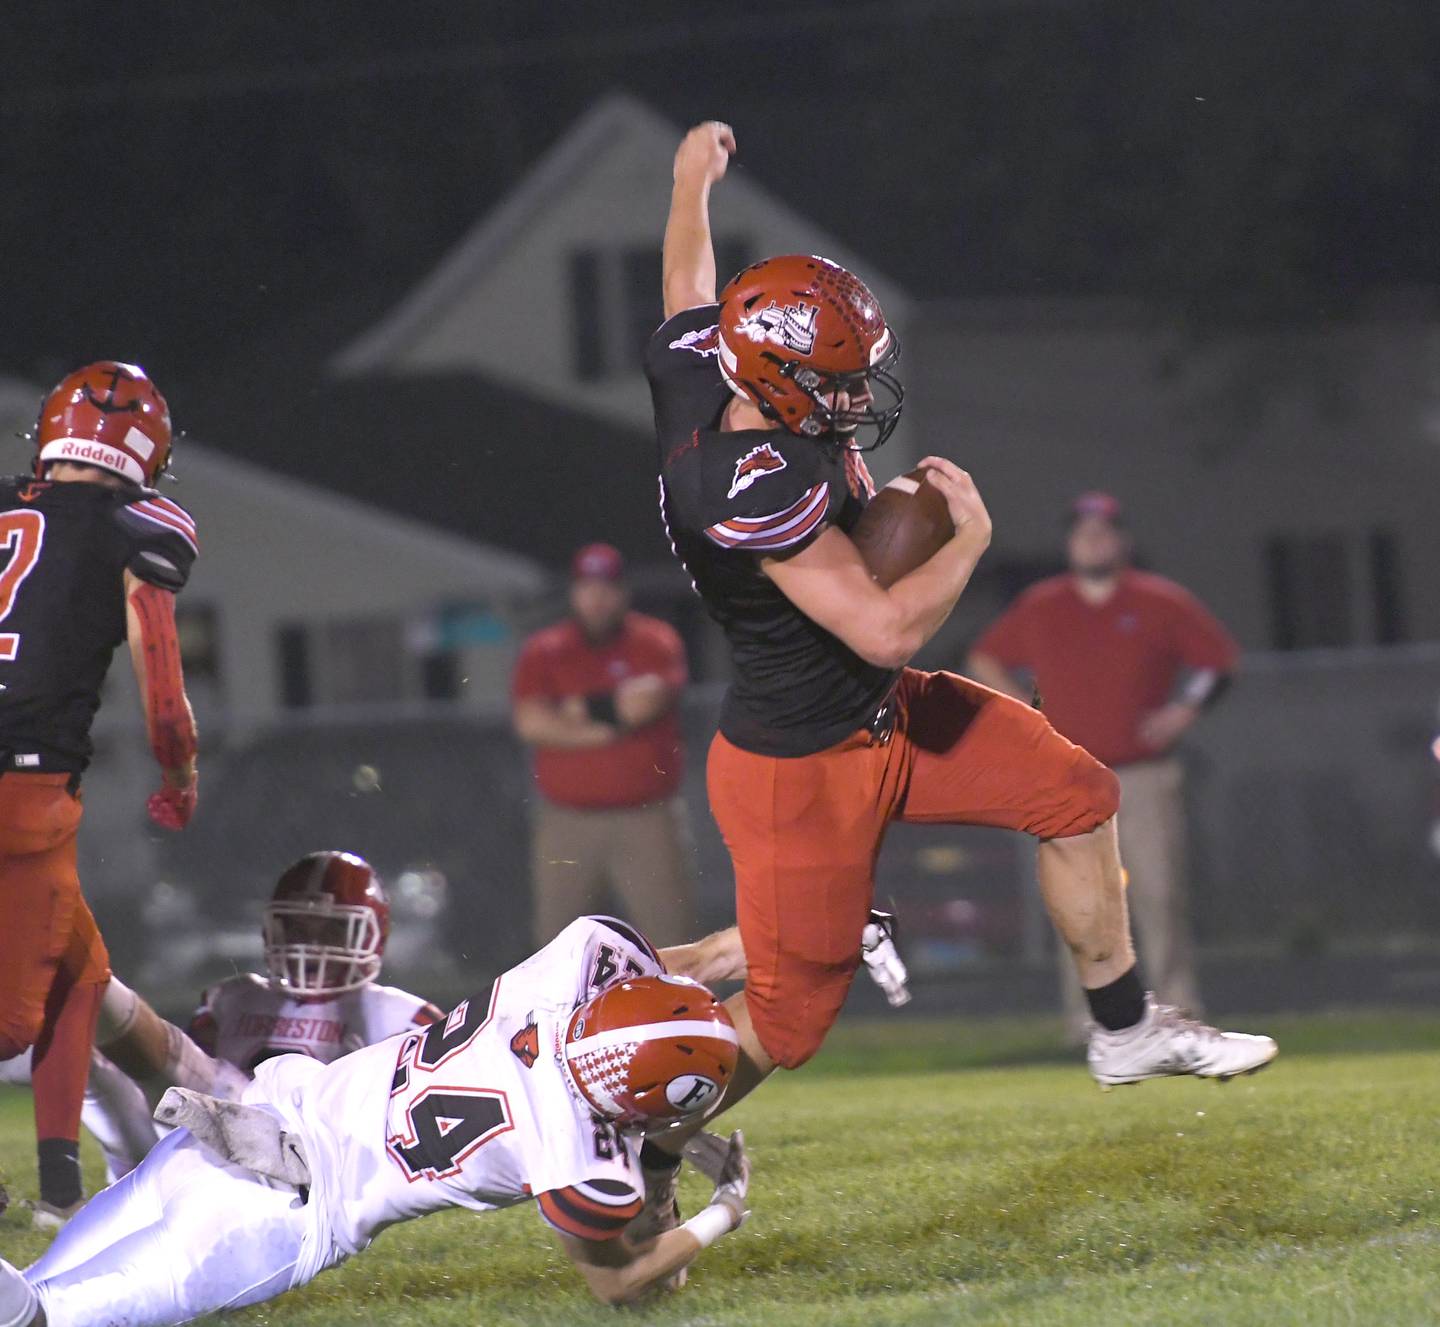 Fulton's Keegan VanKampen keeps his balance and gains a yards as Forreston's Peyton Encheff reaches for the tackle.